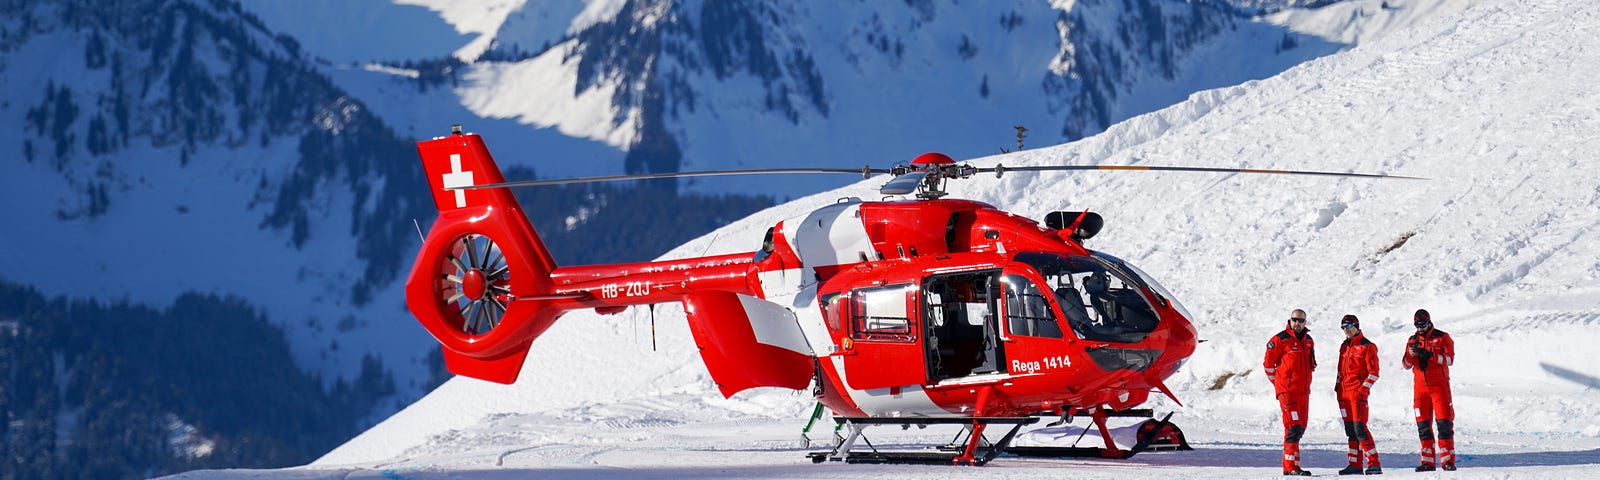 Rescue helicopter in the snow